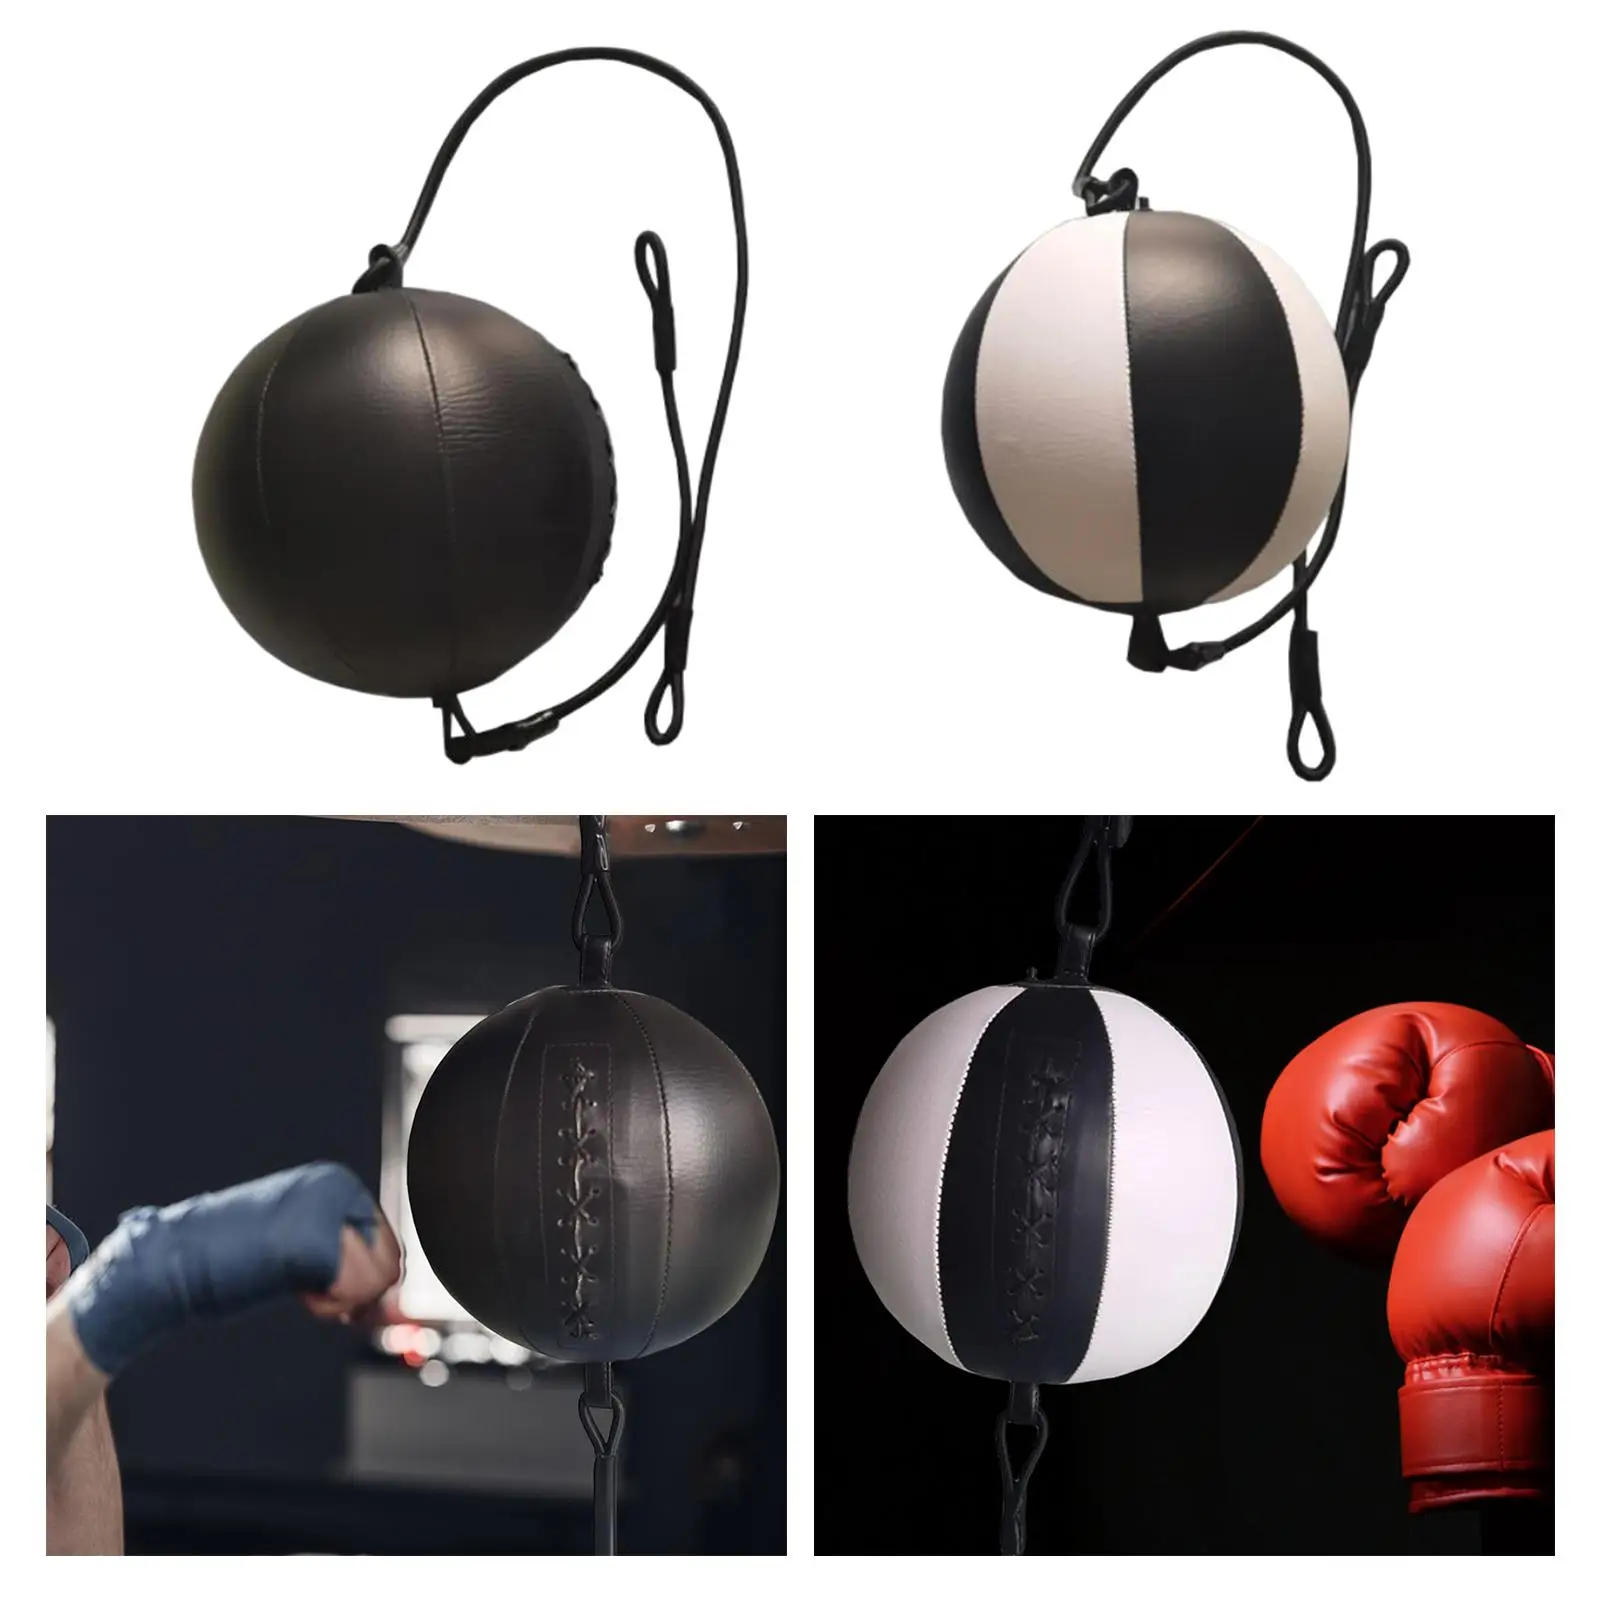 Heavy duty boxing ball speed ball for practice punching muay thai fitness